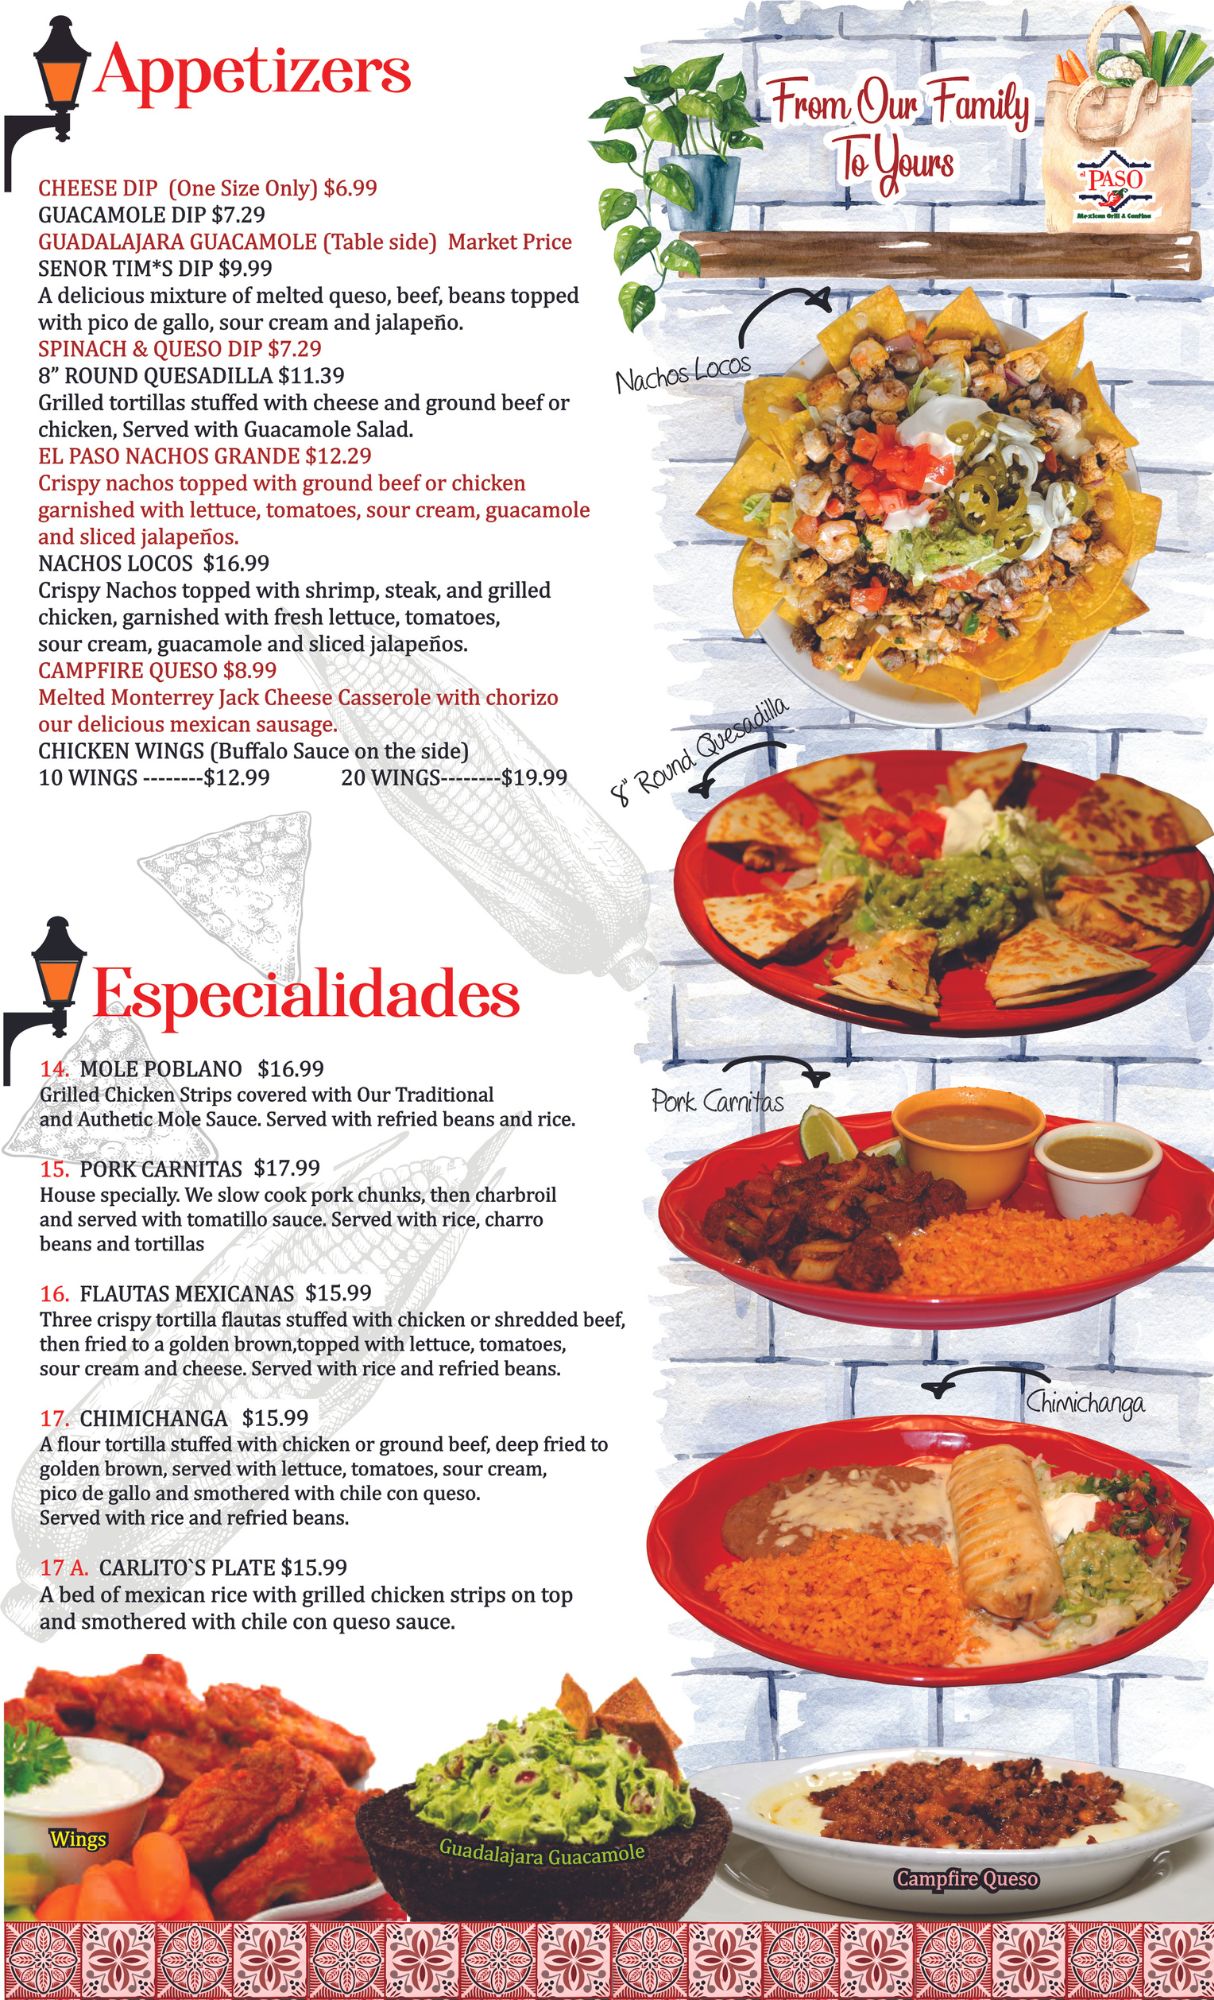 Appetizers/Especialidades